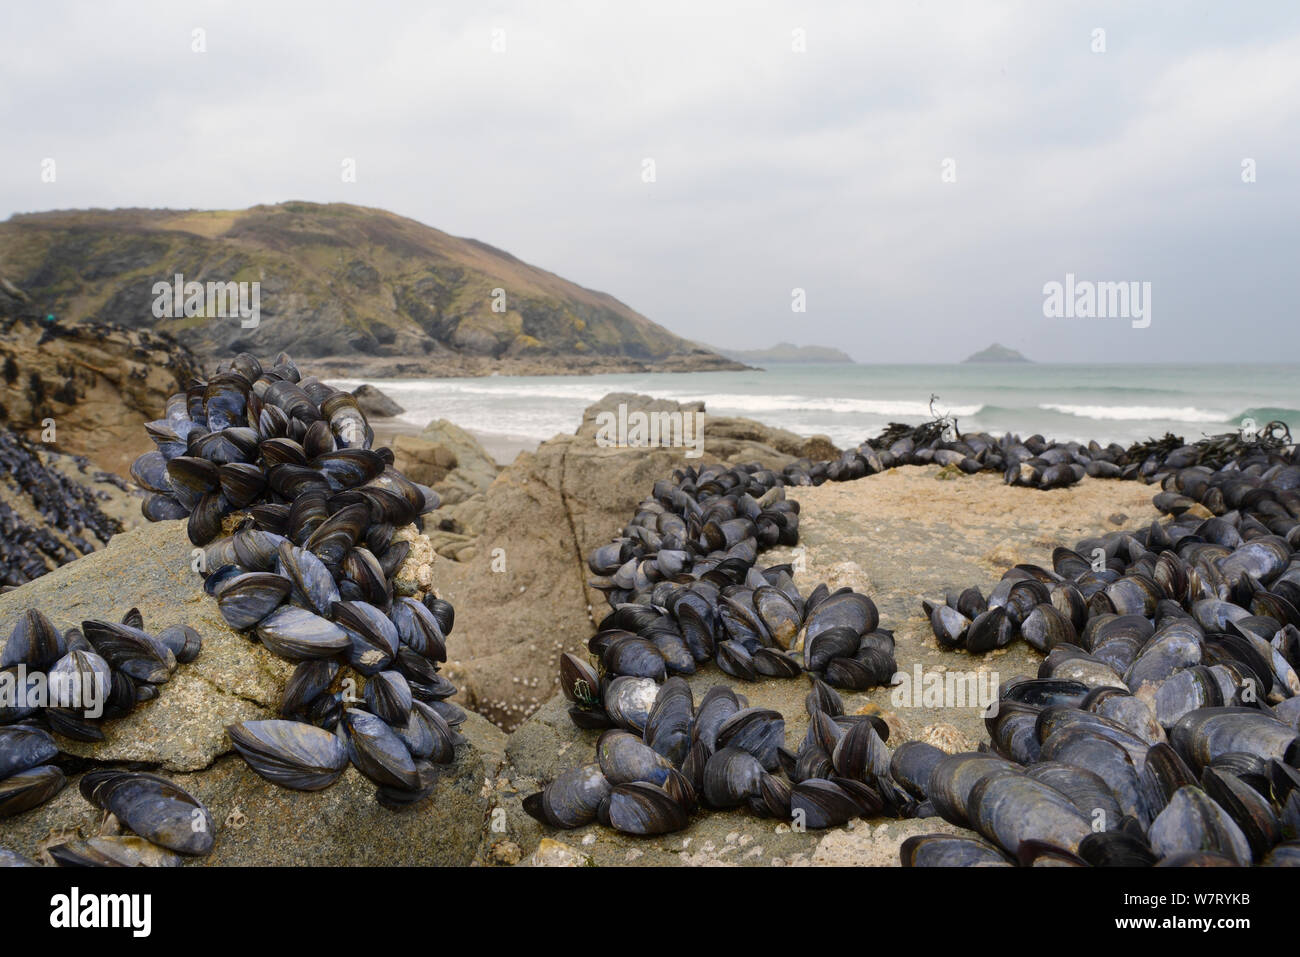 Common mussels (Mytilus edulis) attached to rocks exposed at low tide, Trebarwith strand, Cornwall, UK, April. Stock Photo